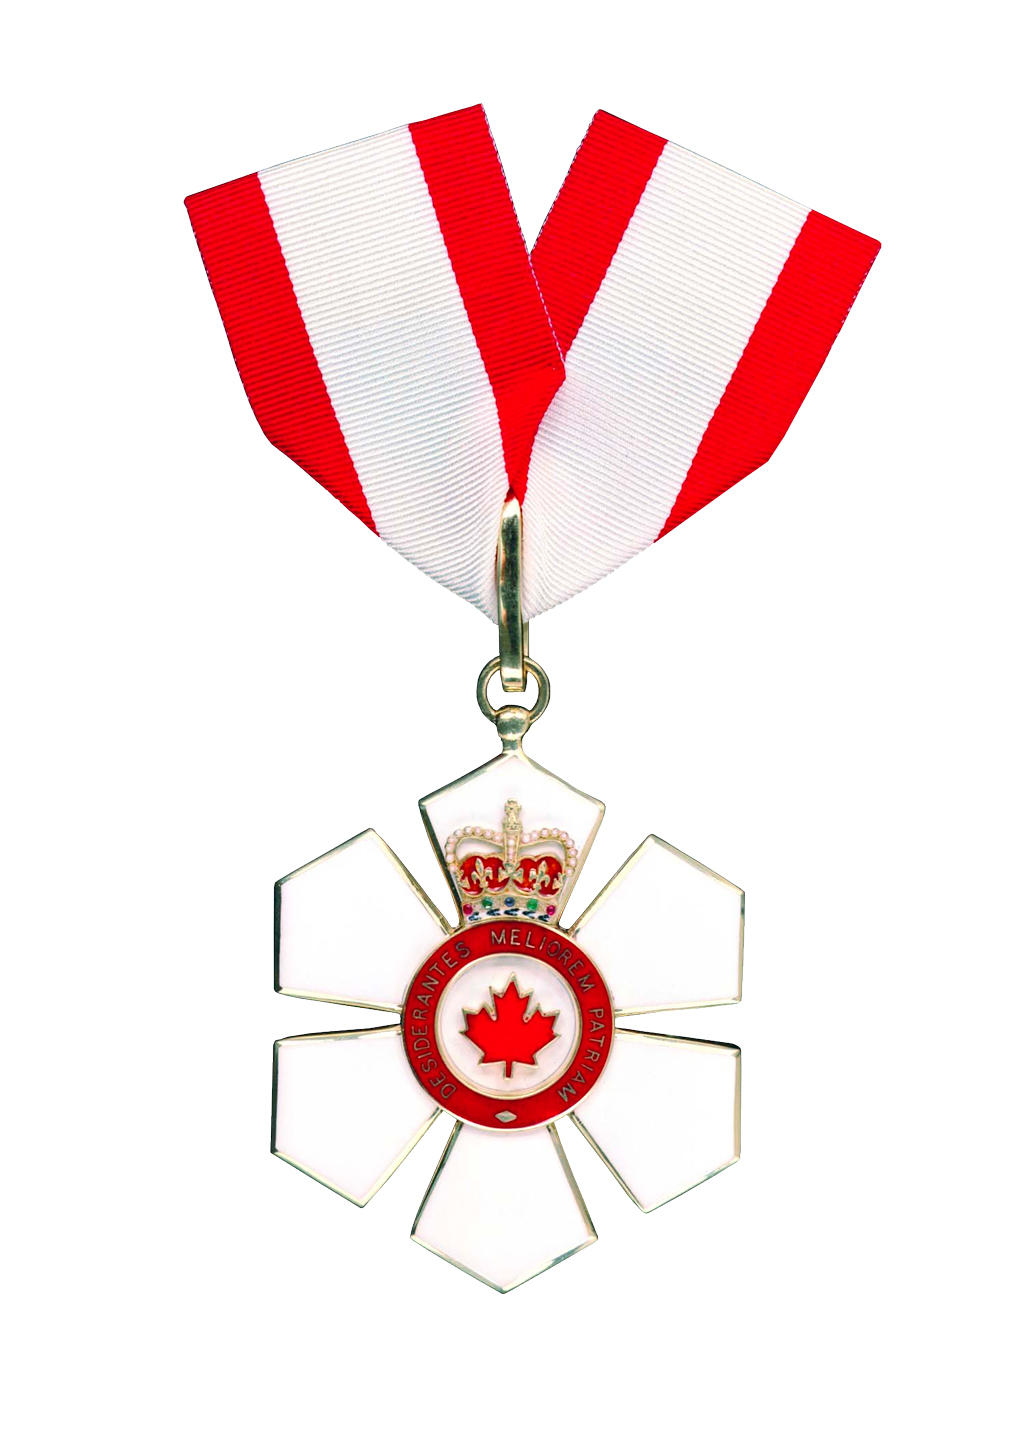 Image of medal.